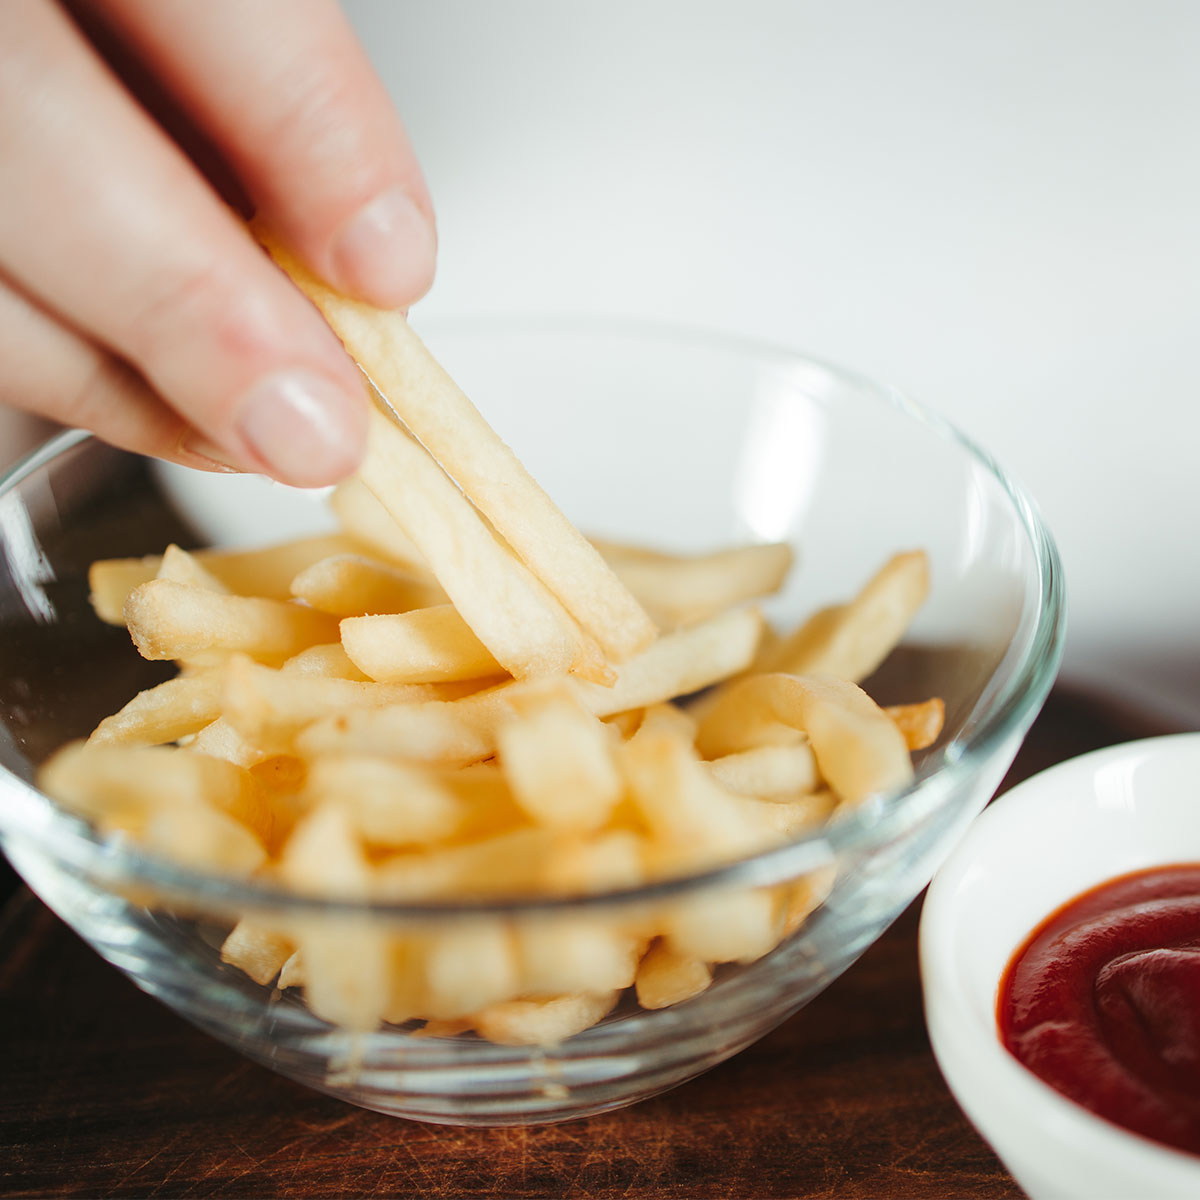 fries with side of ketchup